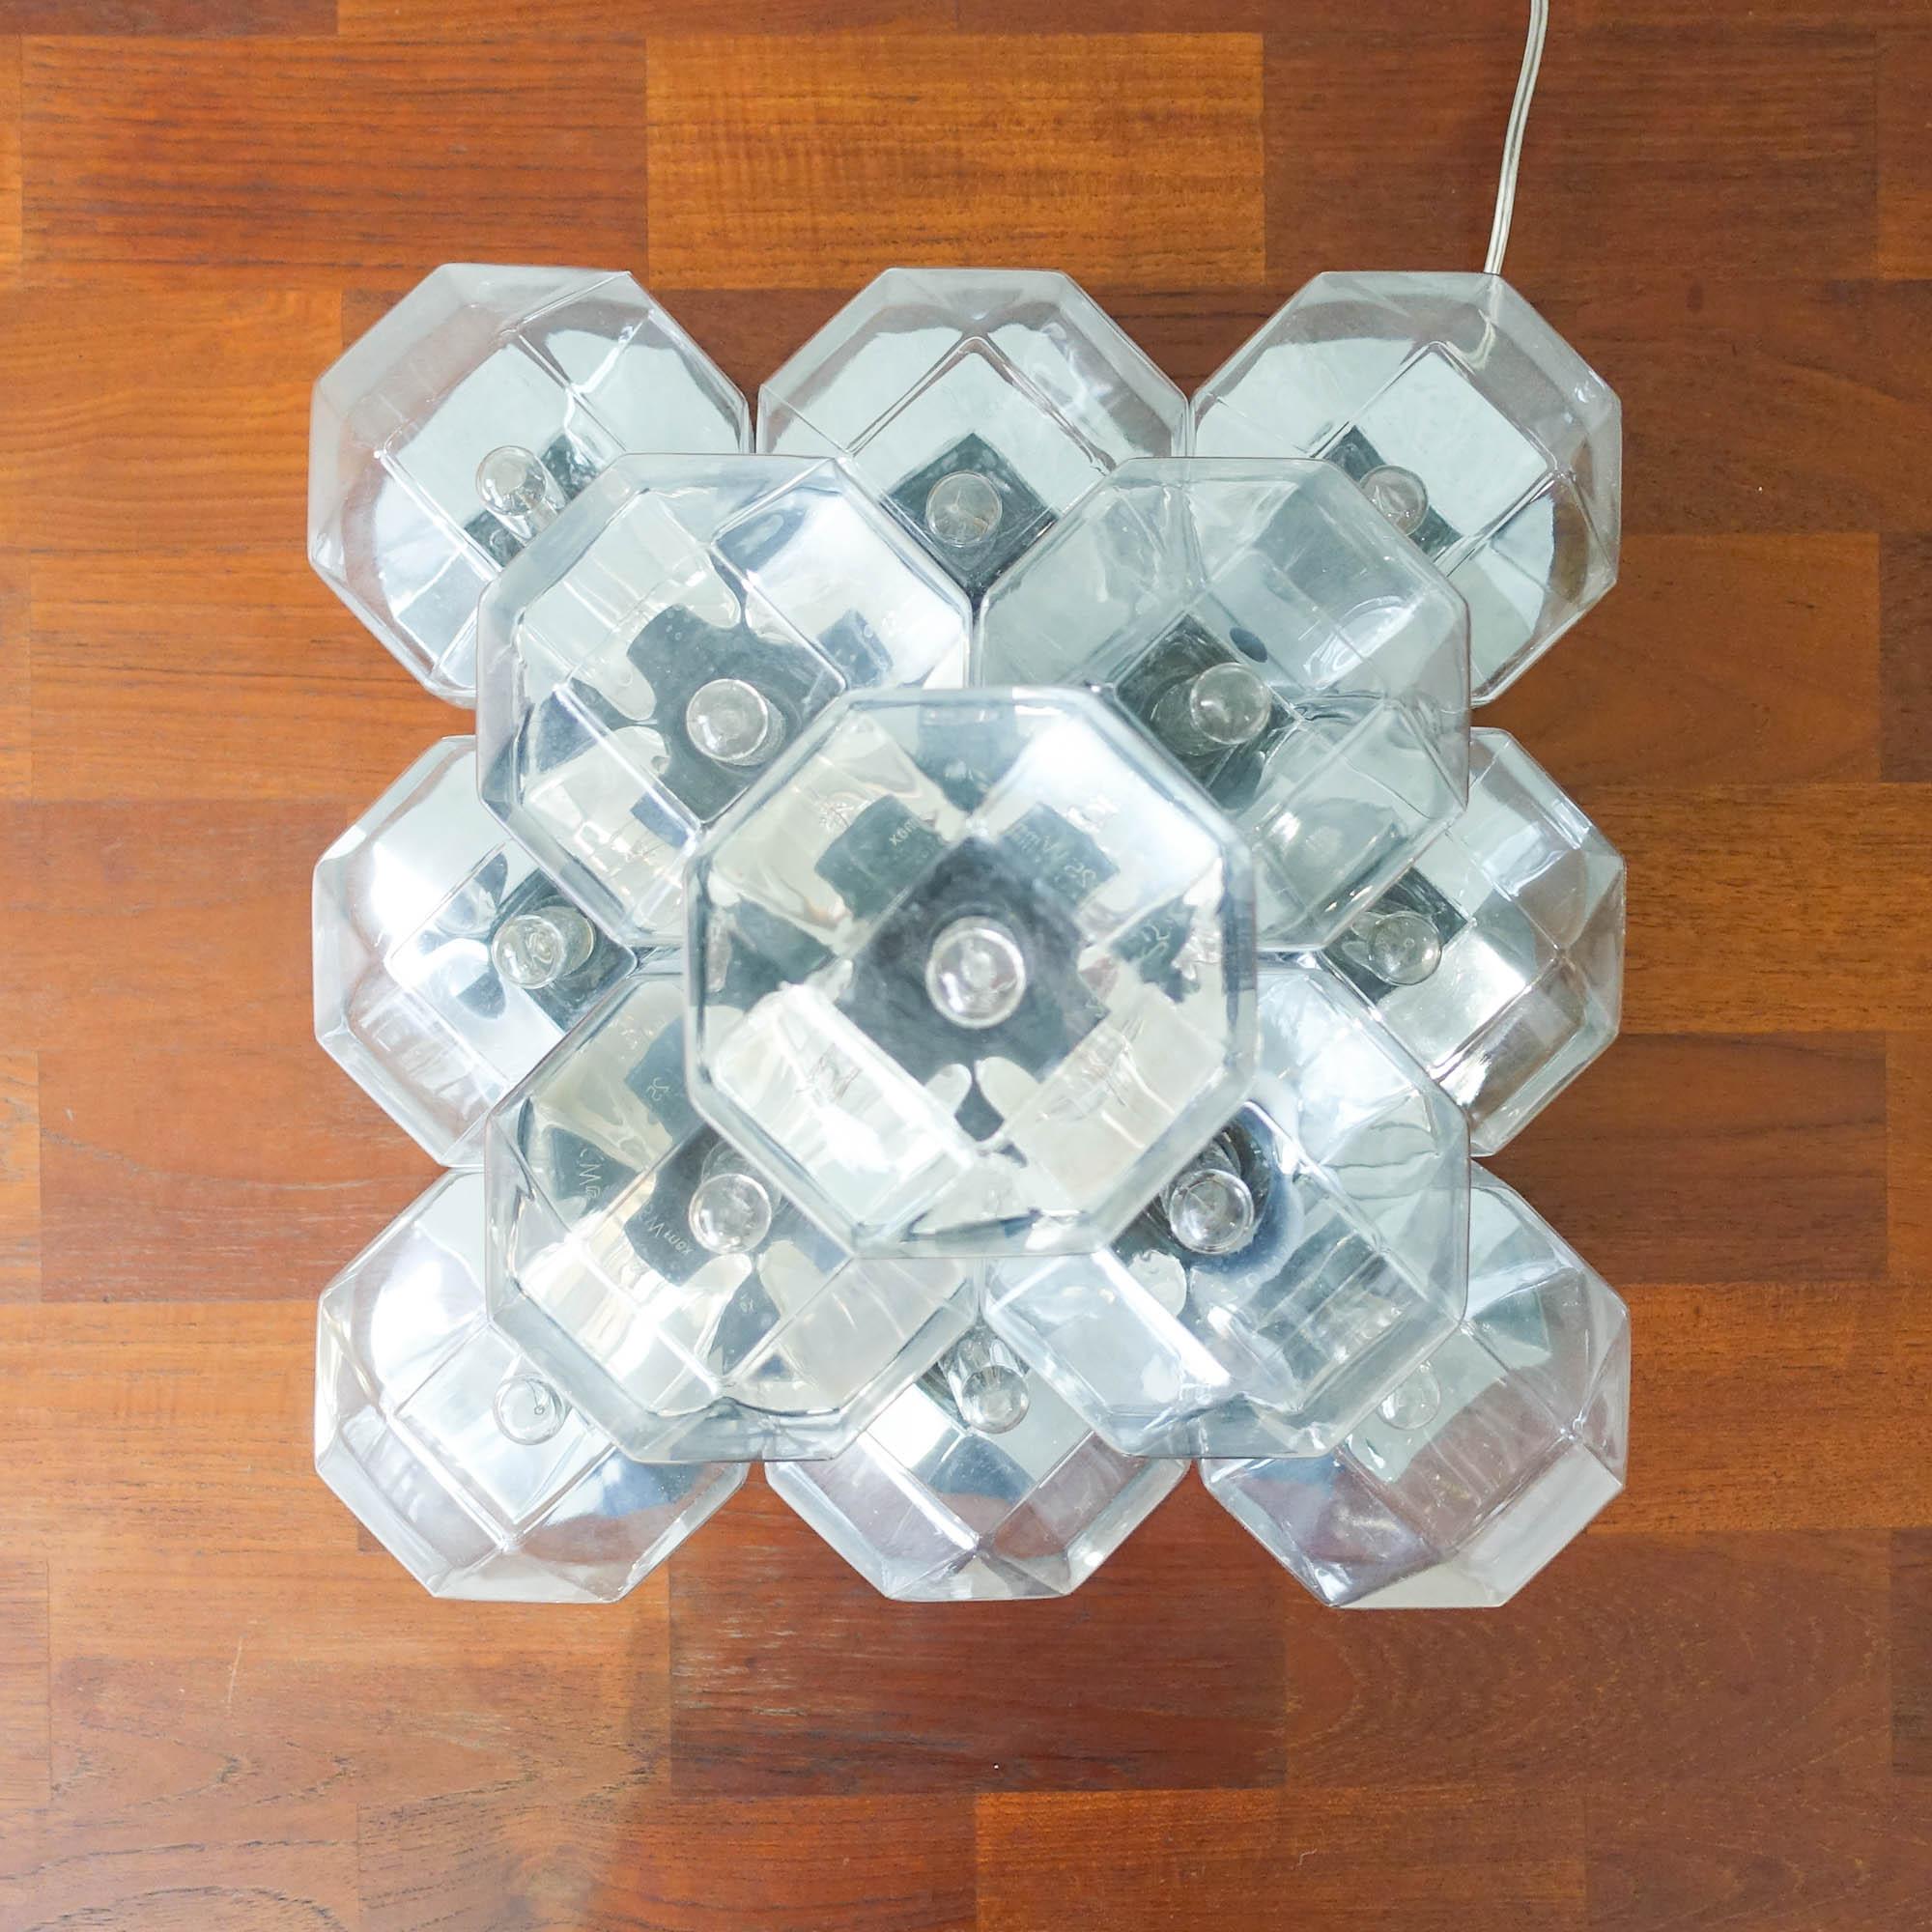 Large German Modular Sconce by Motoko Ishii for Staff, 1970s For Sale 1